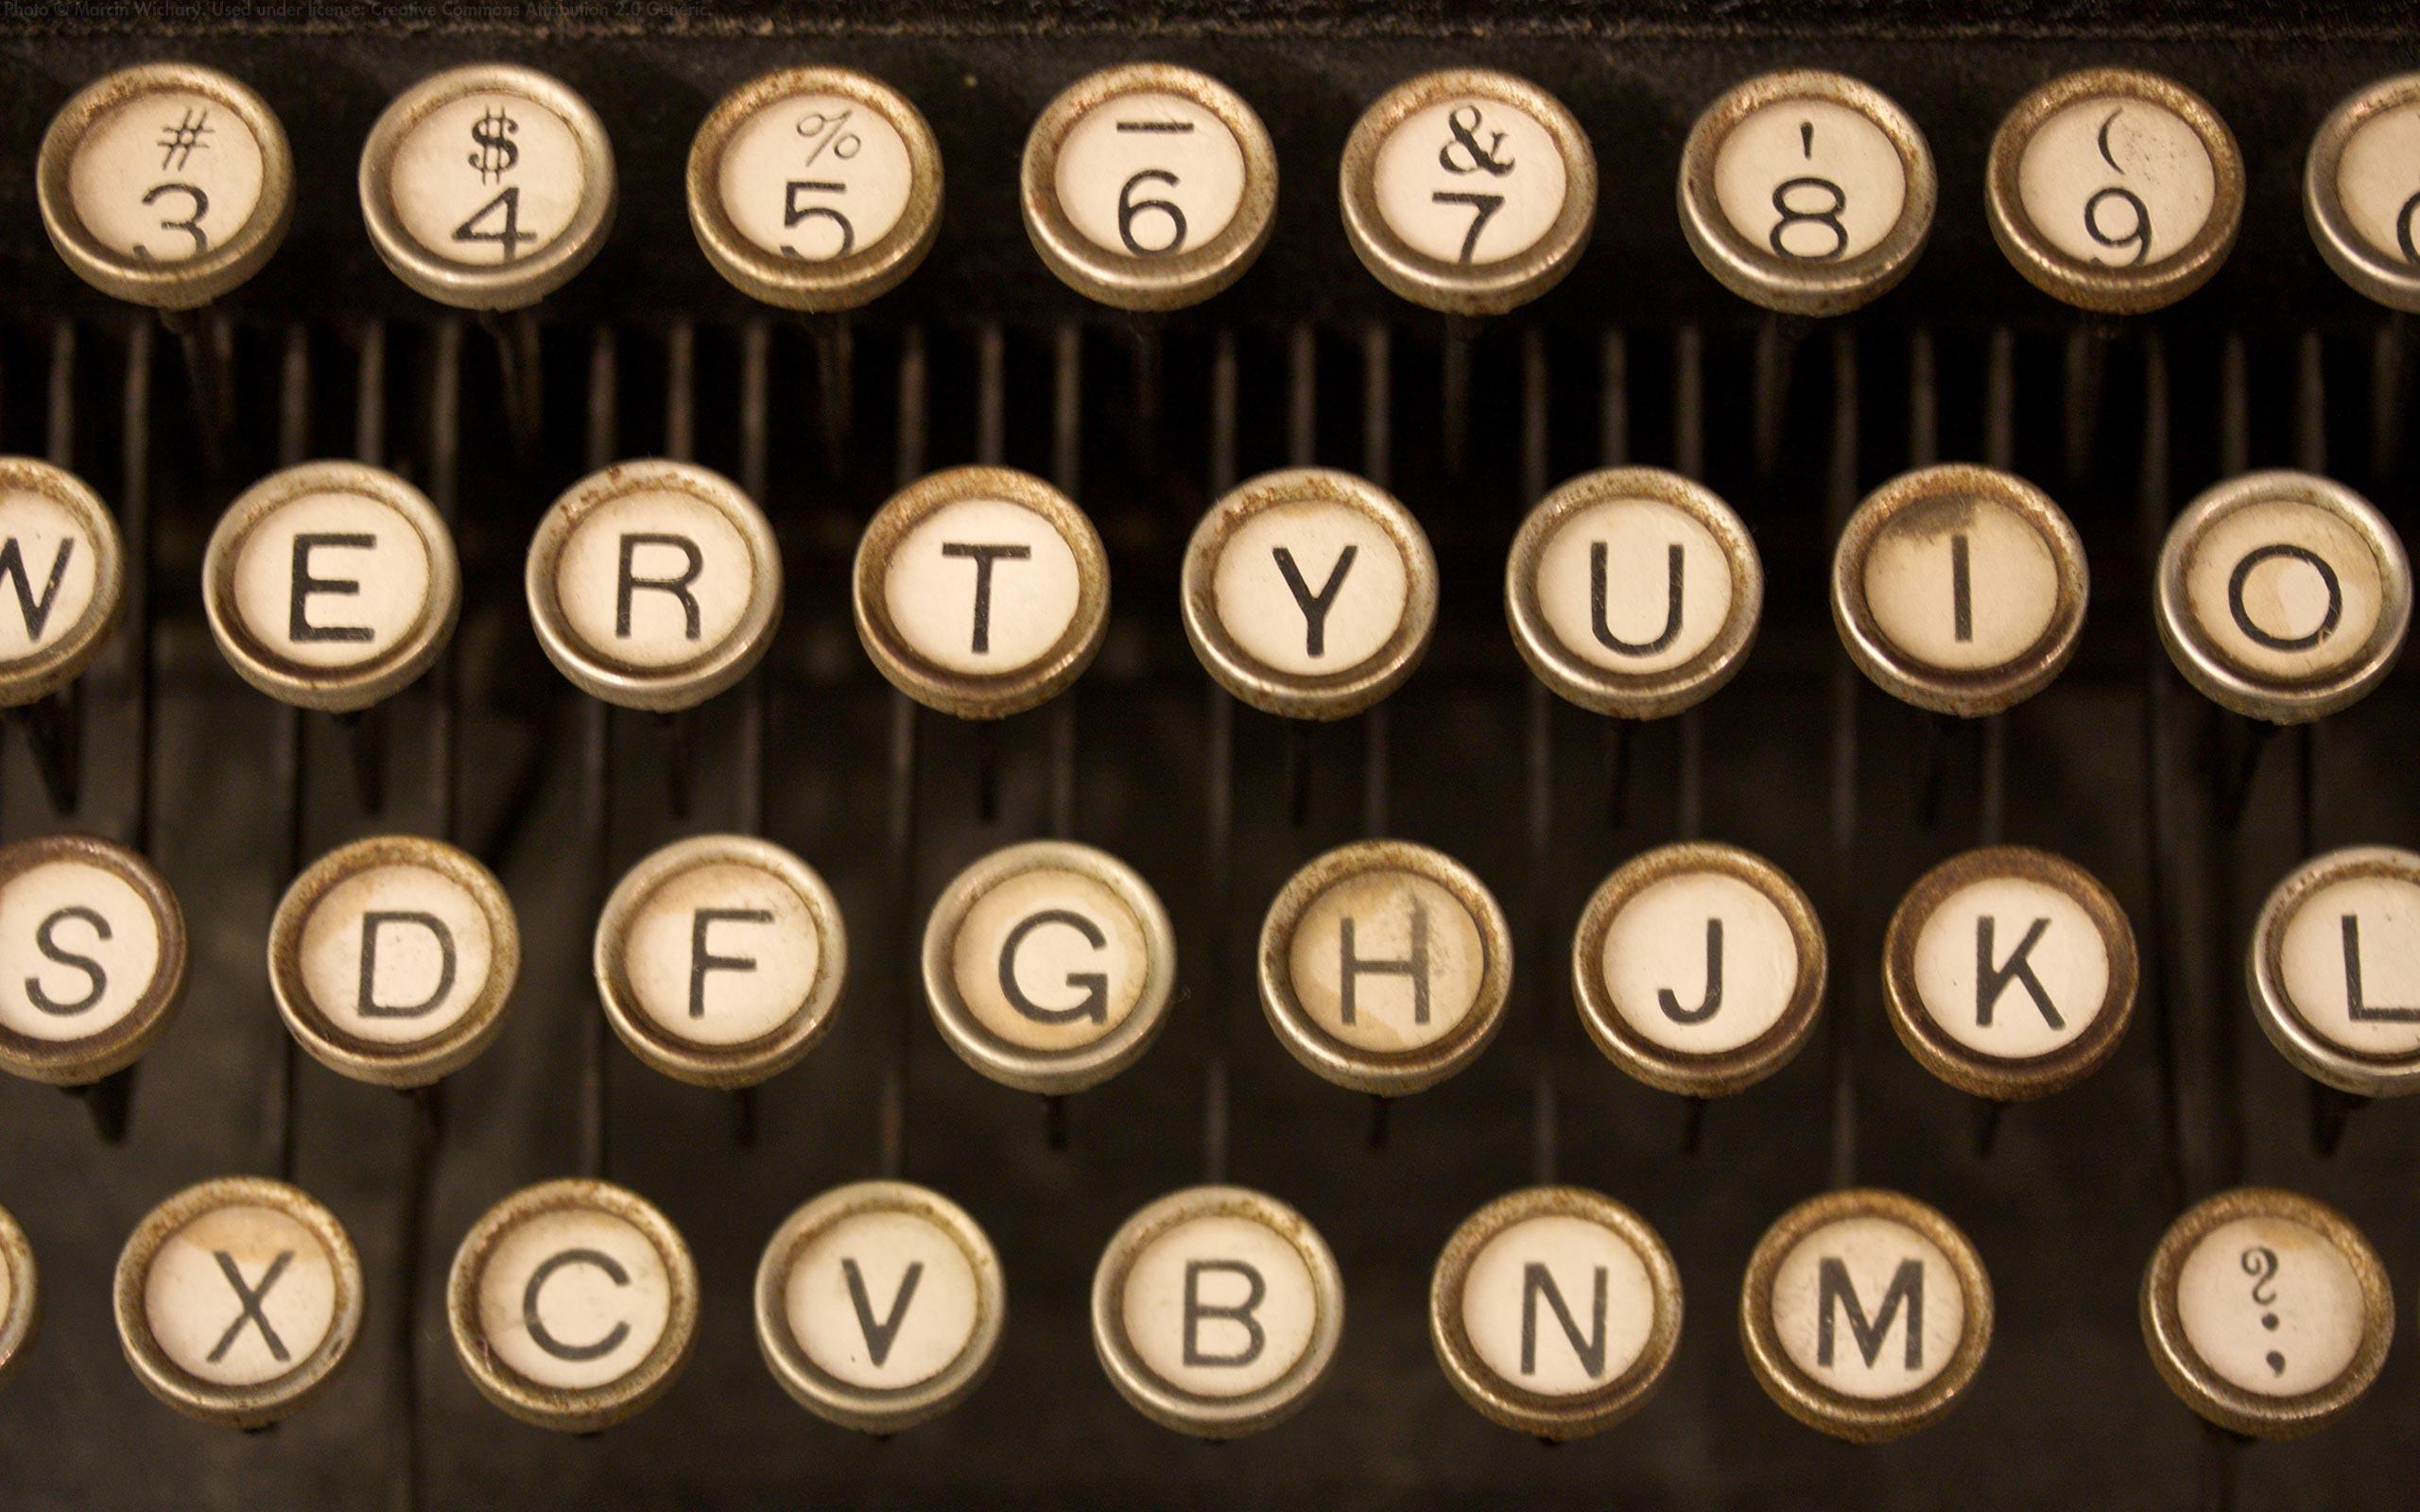 Typewriter's Letters wallpaper. Typewriter's Letters